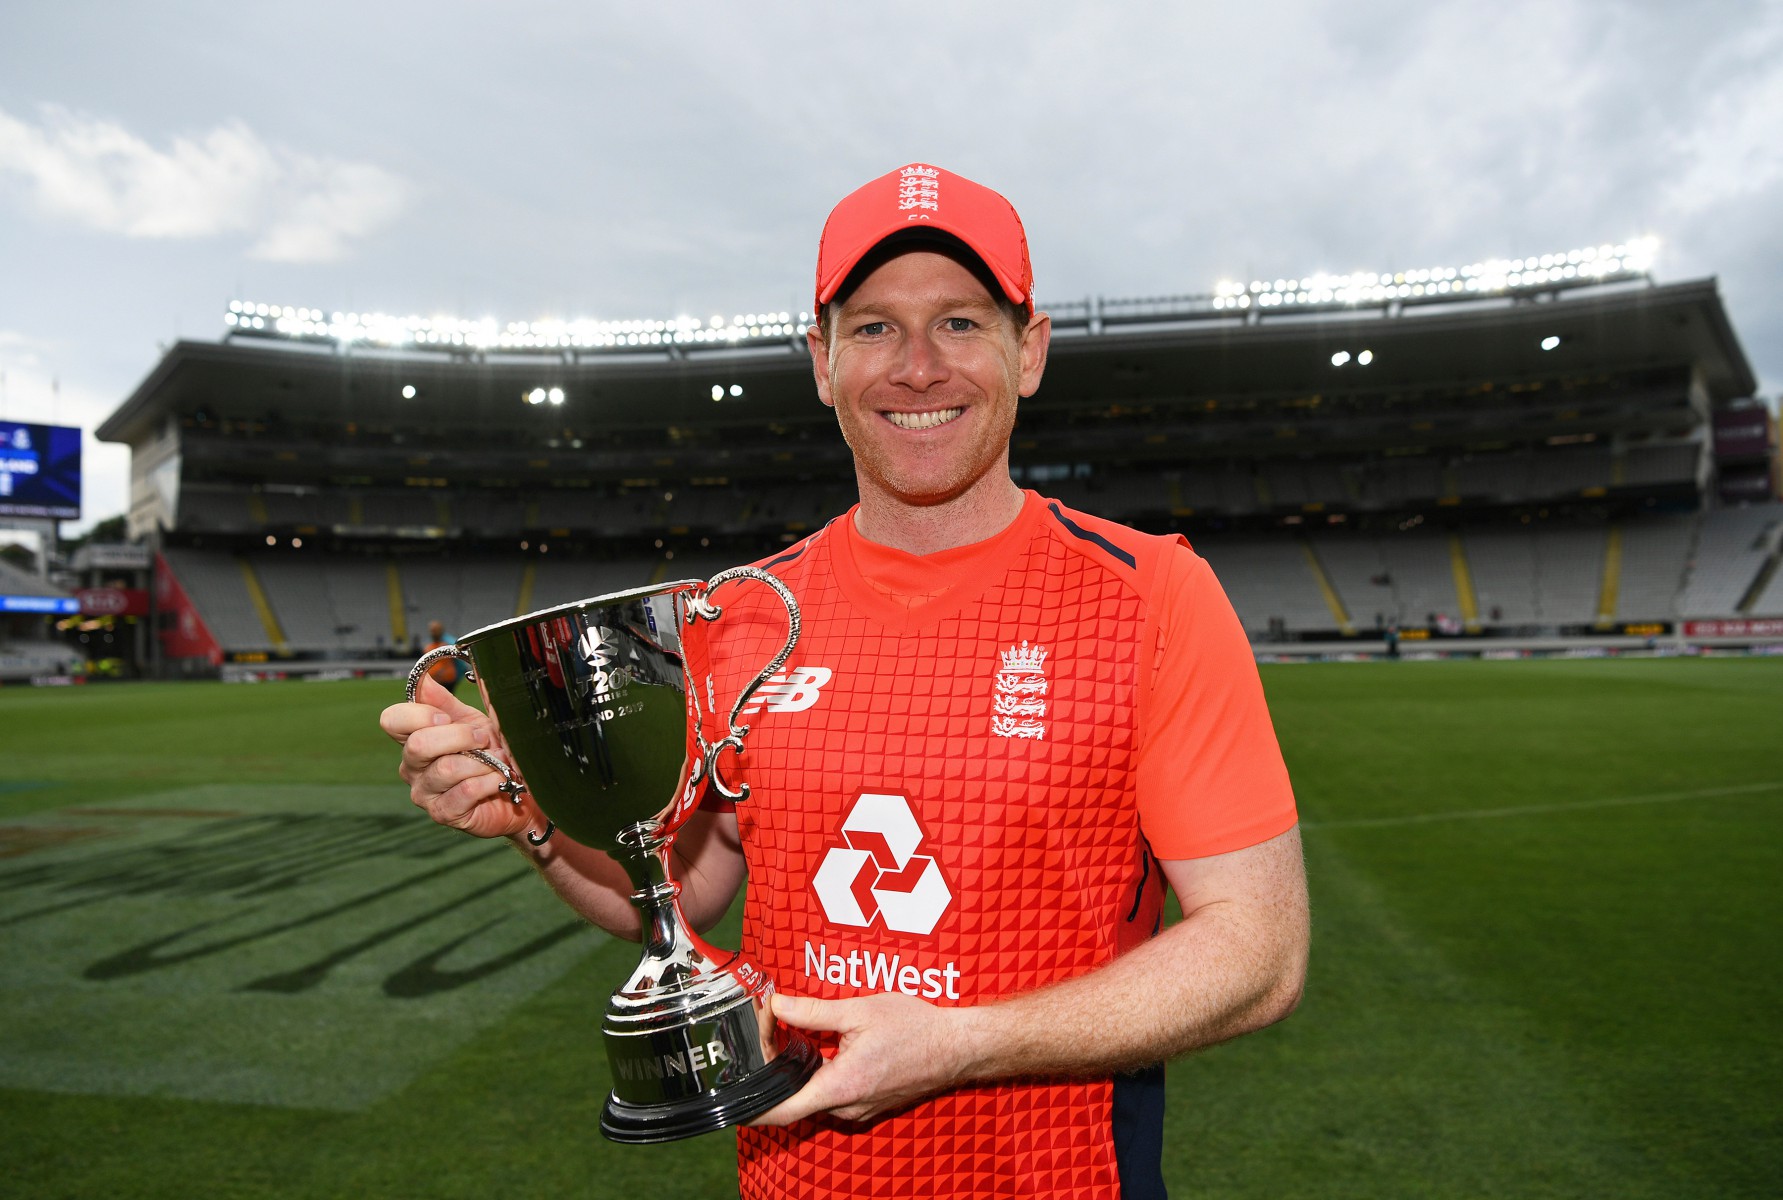 Morgan poses with the T20 series trophy after wrapping up a 3-2 victory for the tourists